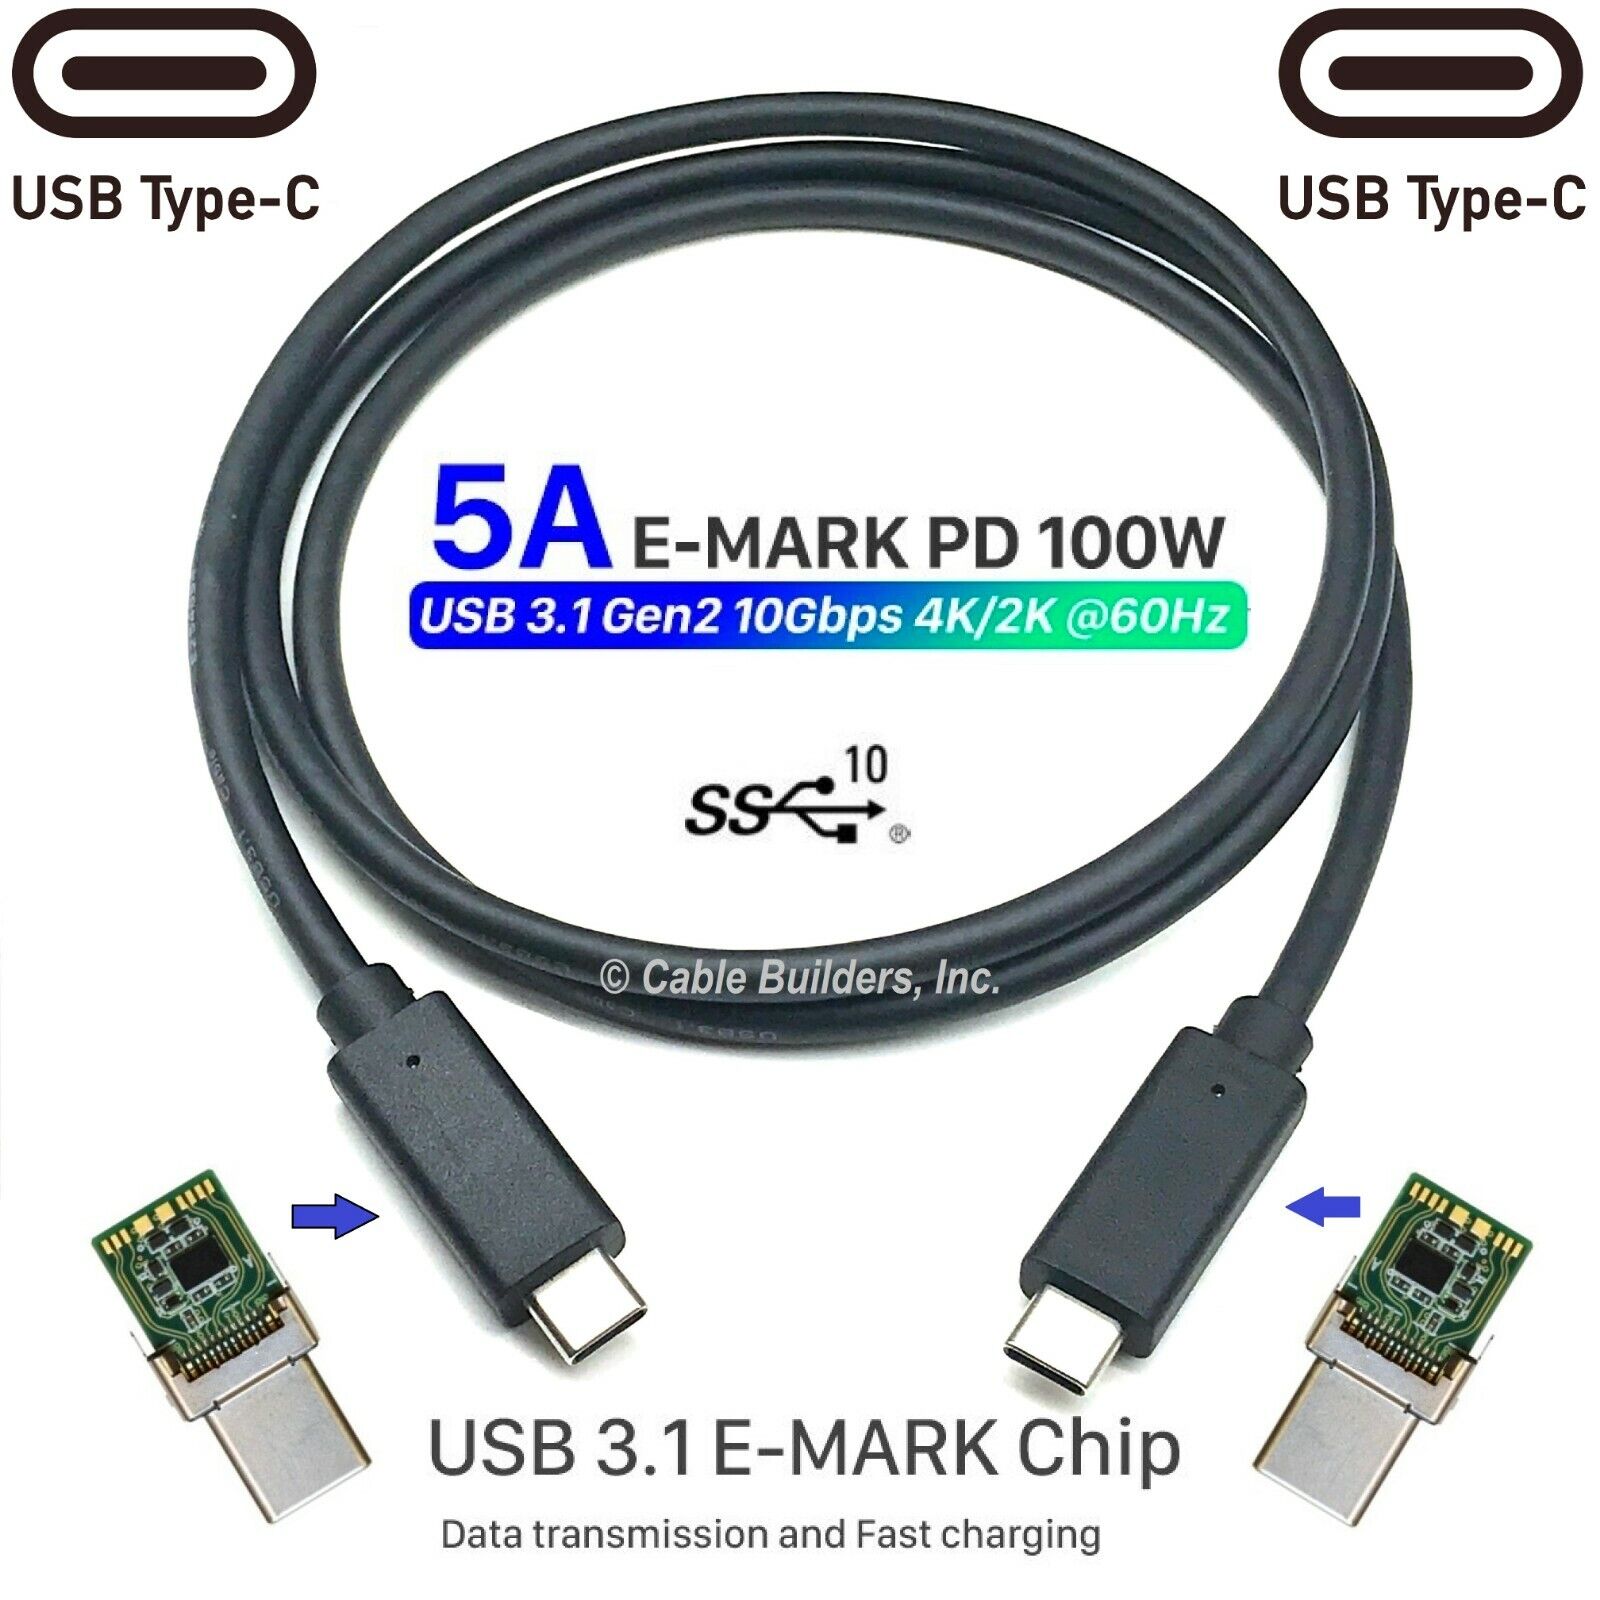 USB-C to USB-C Cable 3.1 Gen 2 100W 20V 5A Charging 10Gbps Data E-Mark Chipset